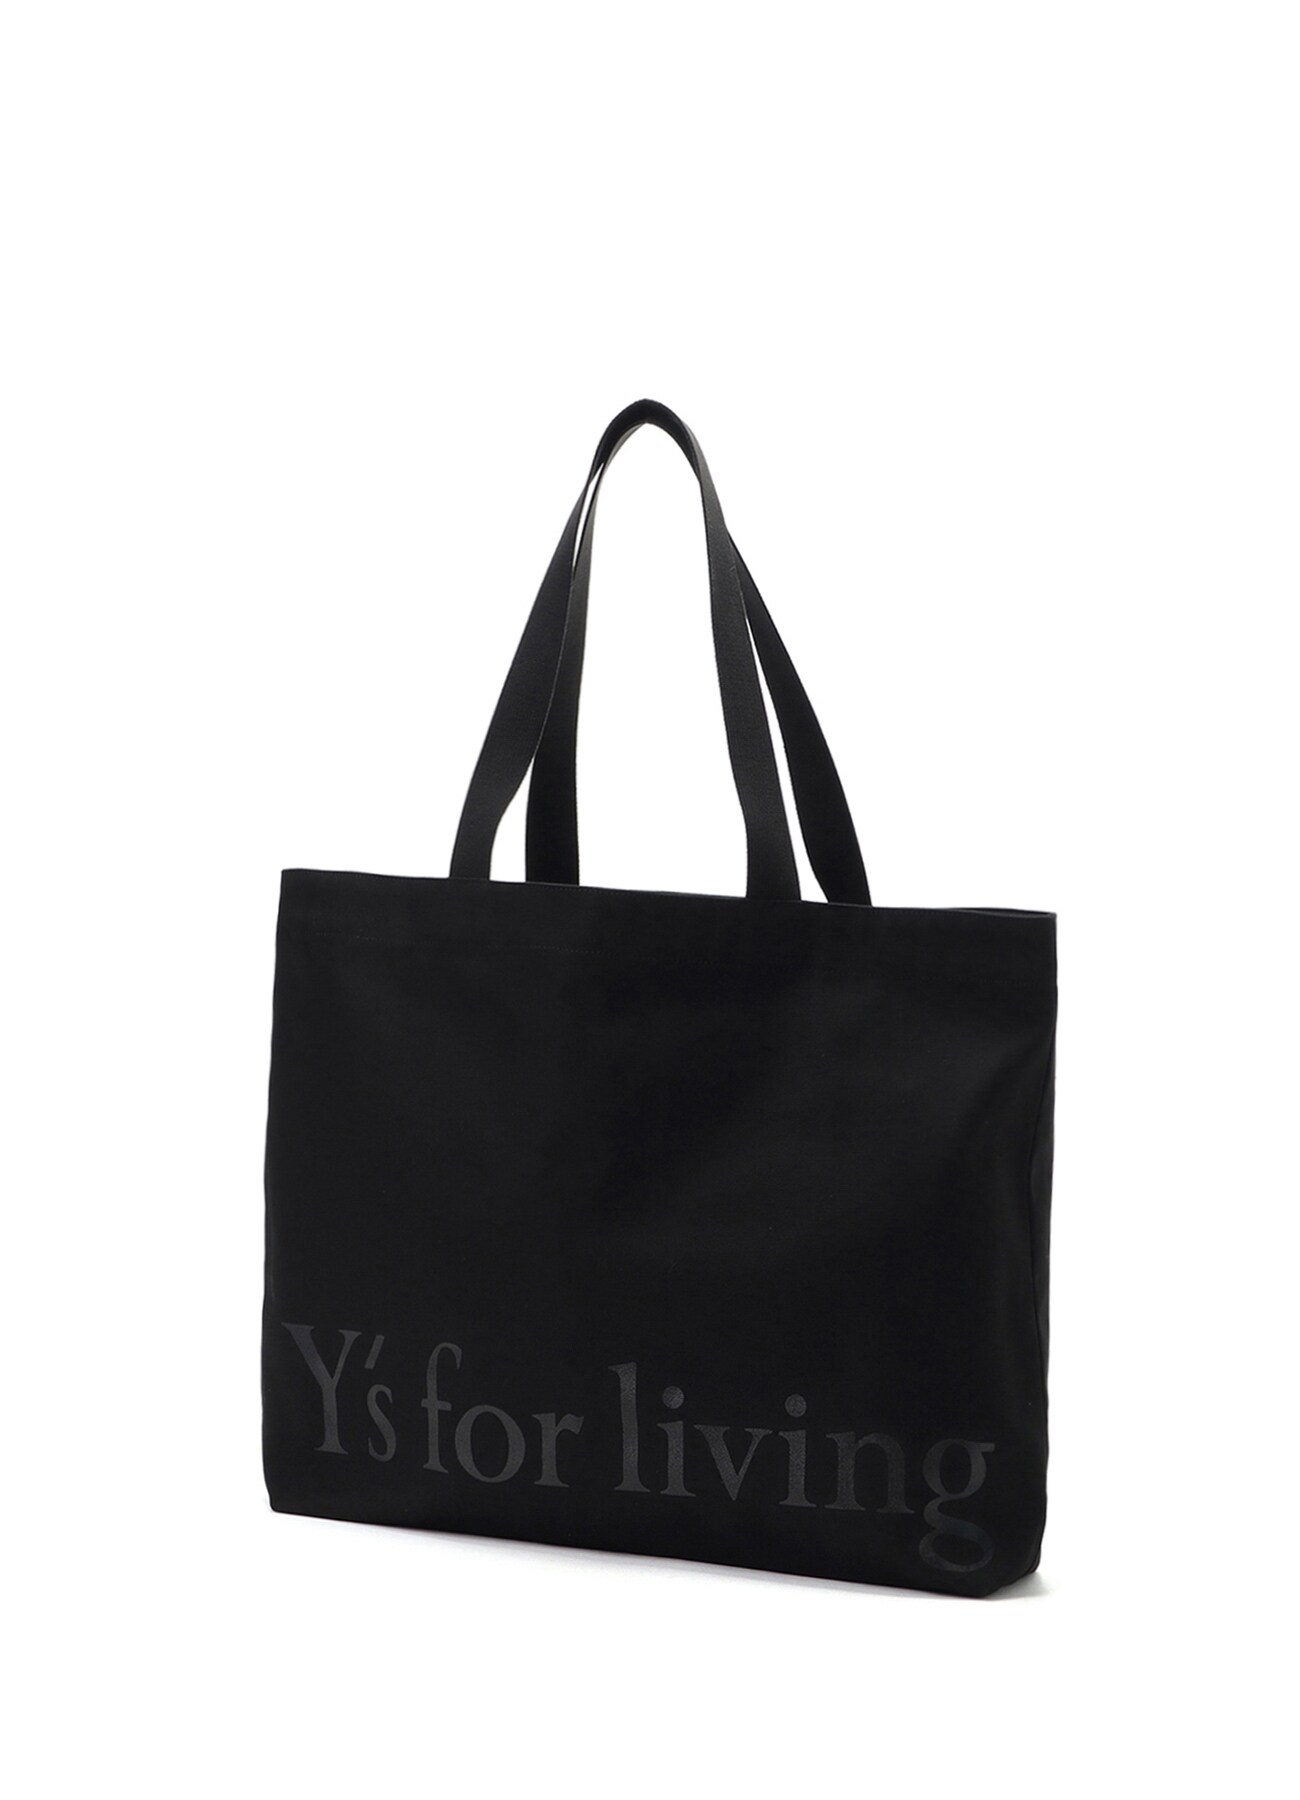 Y's for living｜ THE SHOP YOHJI YAMAMOTO (order: $ LOW to HIGH)